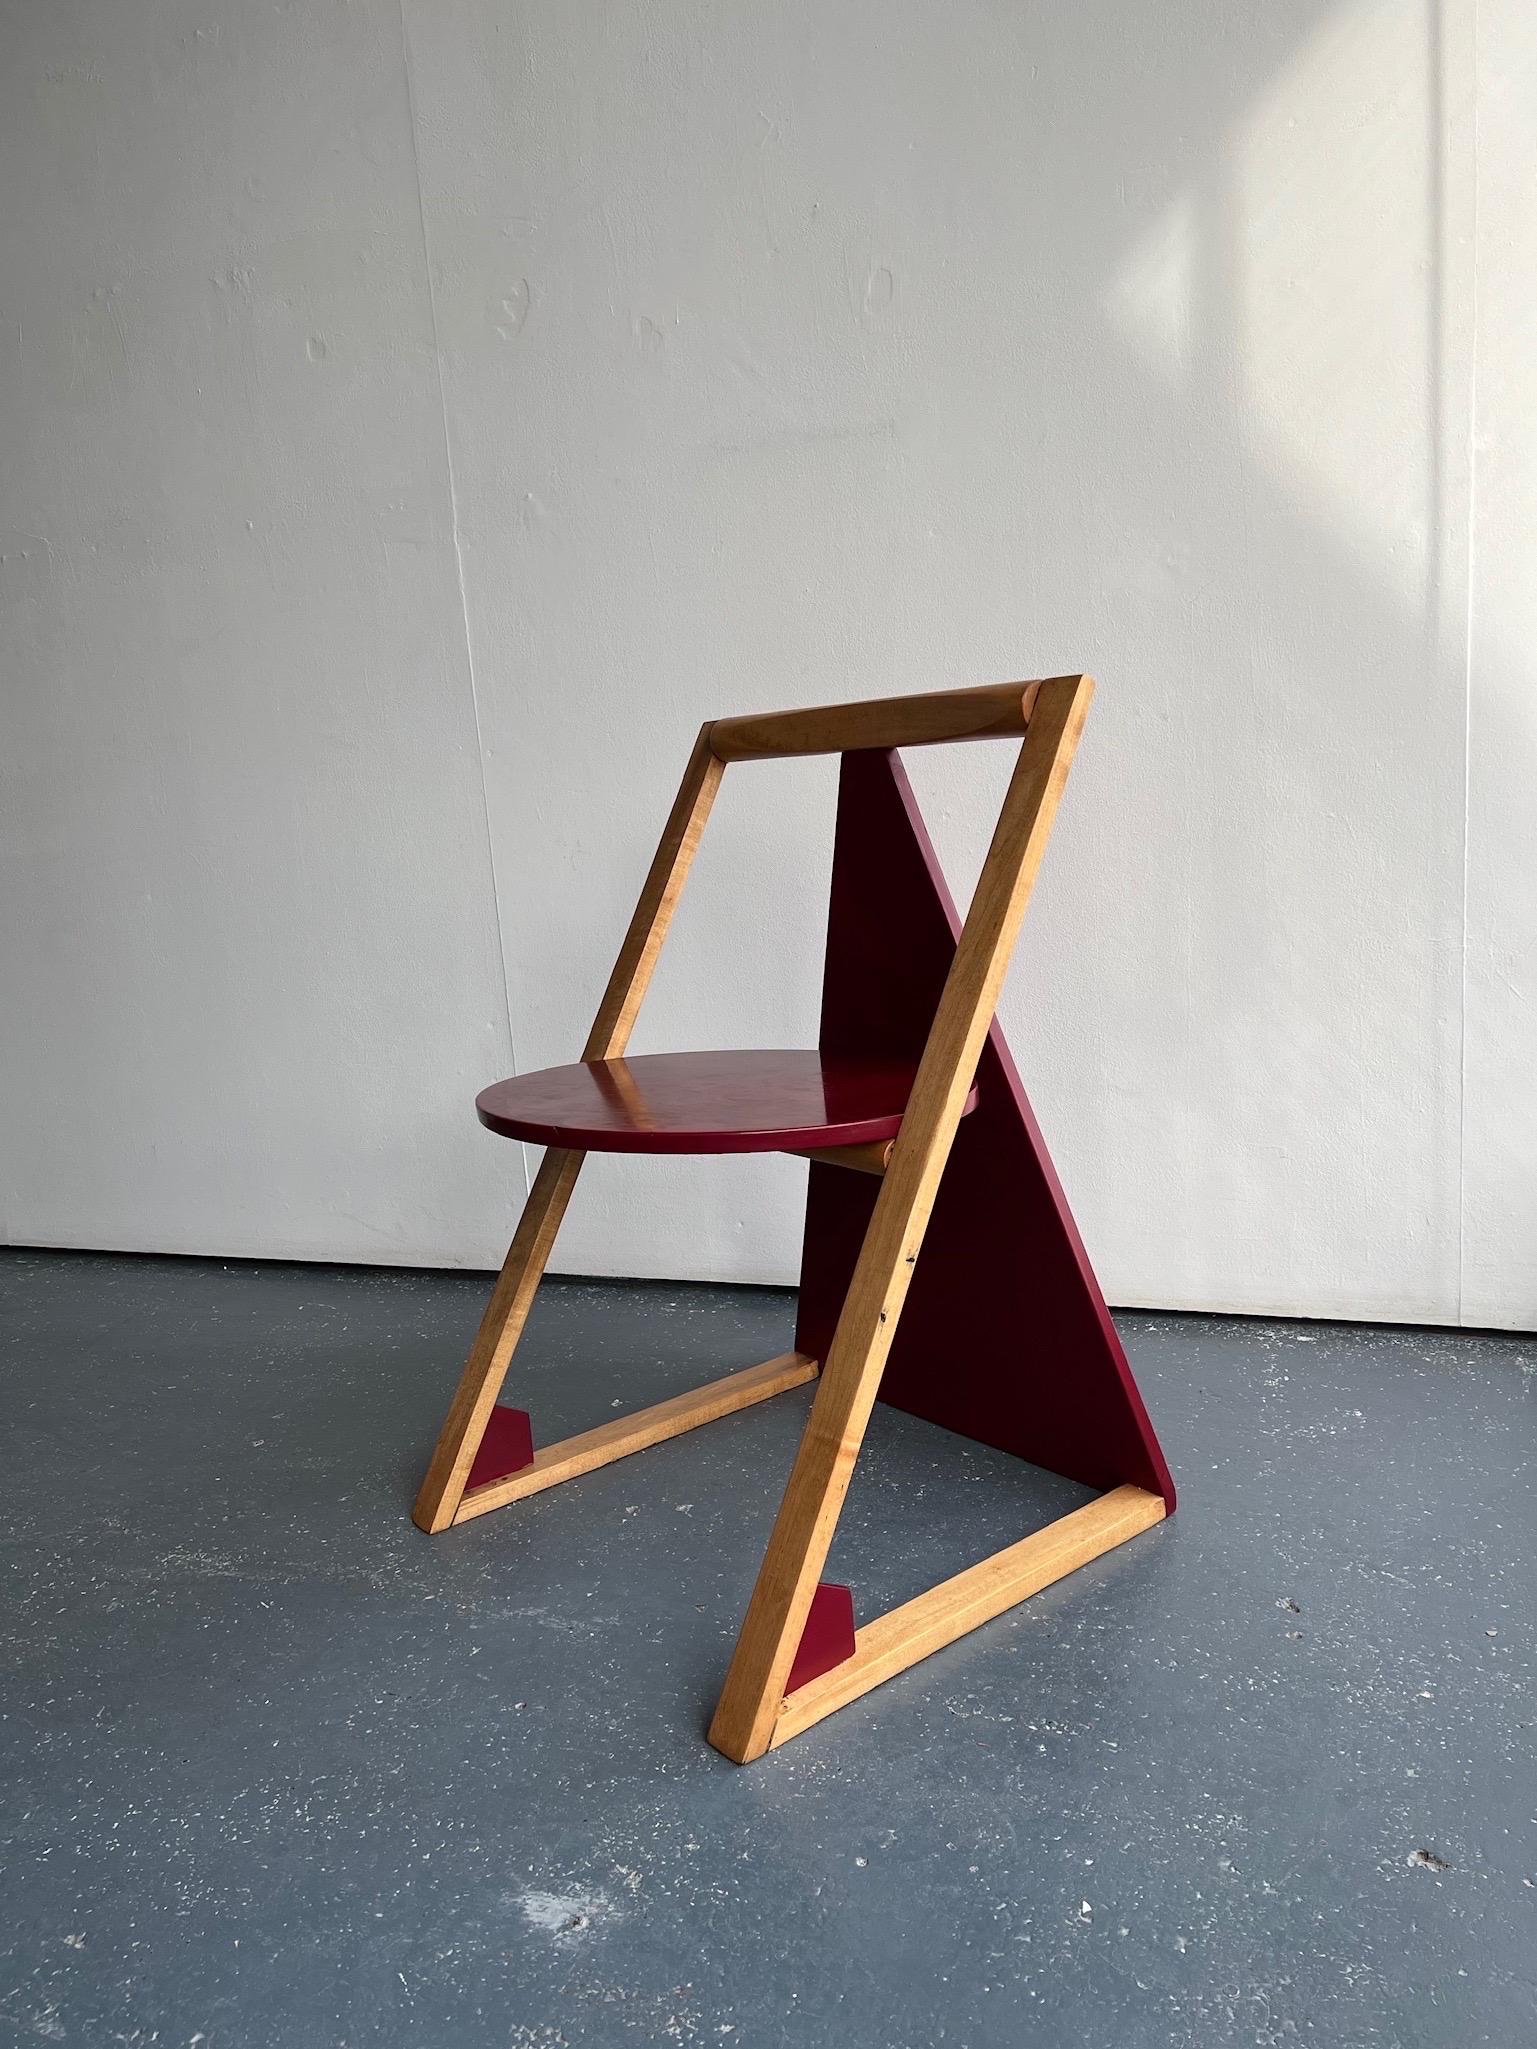 Late 20th Century Triangular Wooden Memphis Style Chair